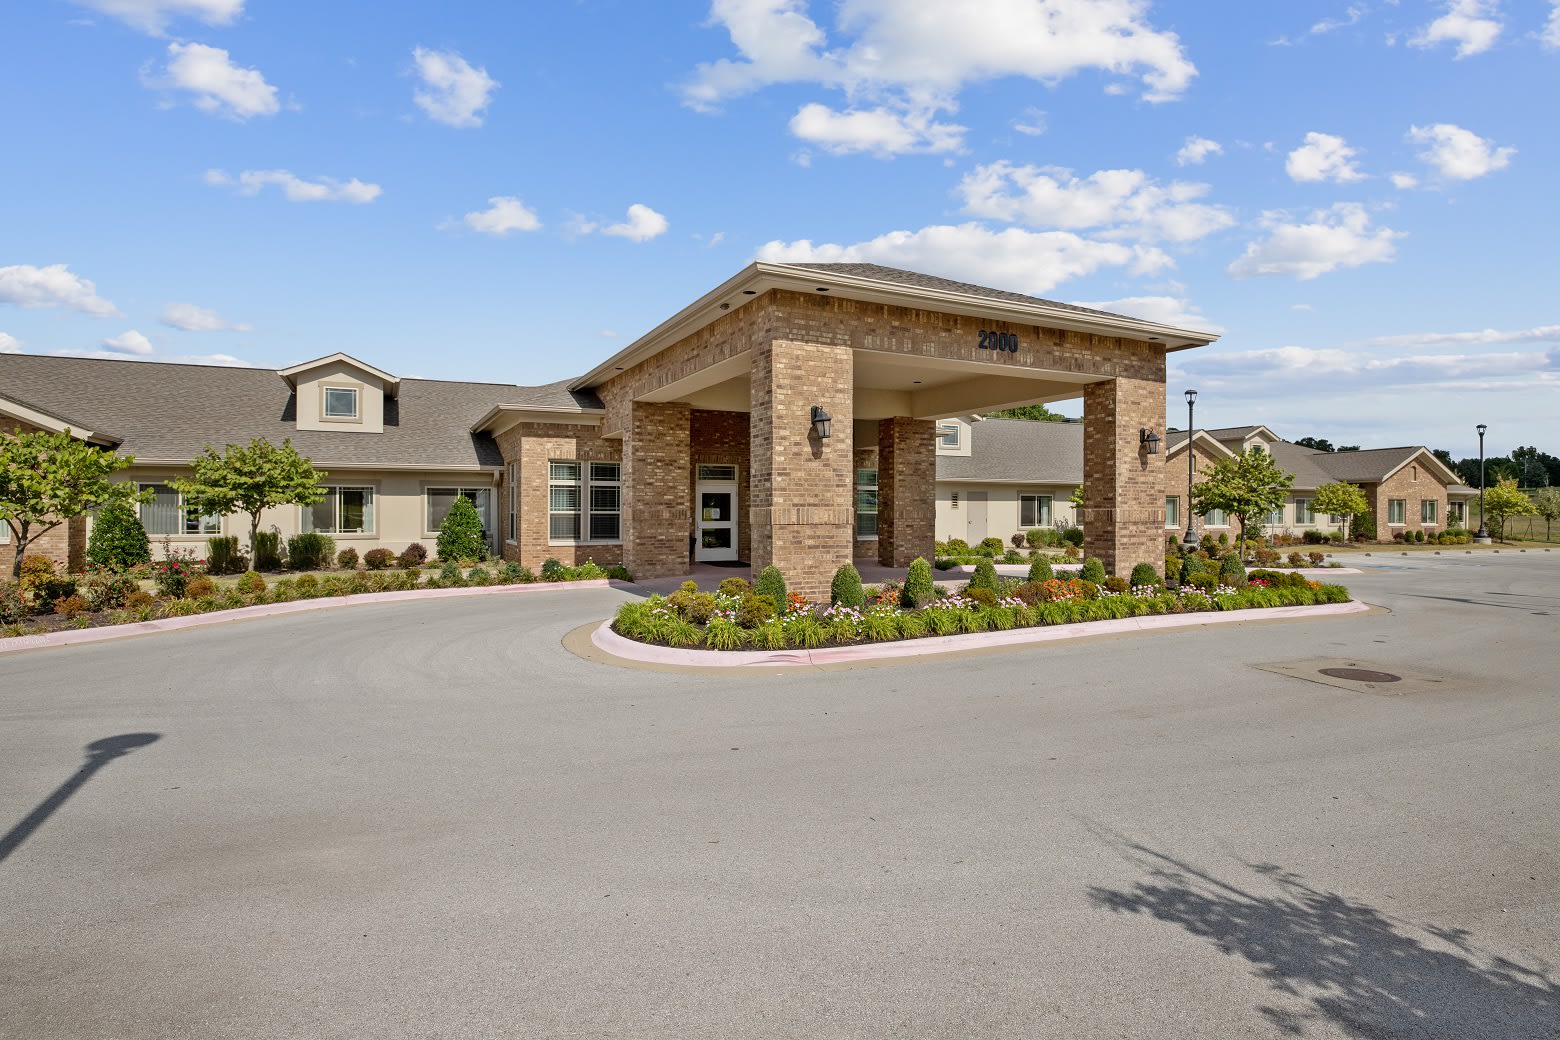 Magnolia Place Transitional Assisted Living and Memory Care community exterior